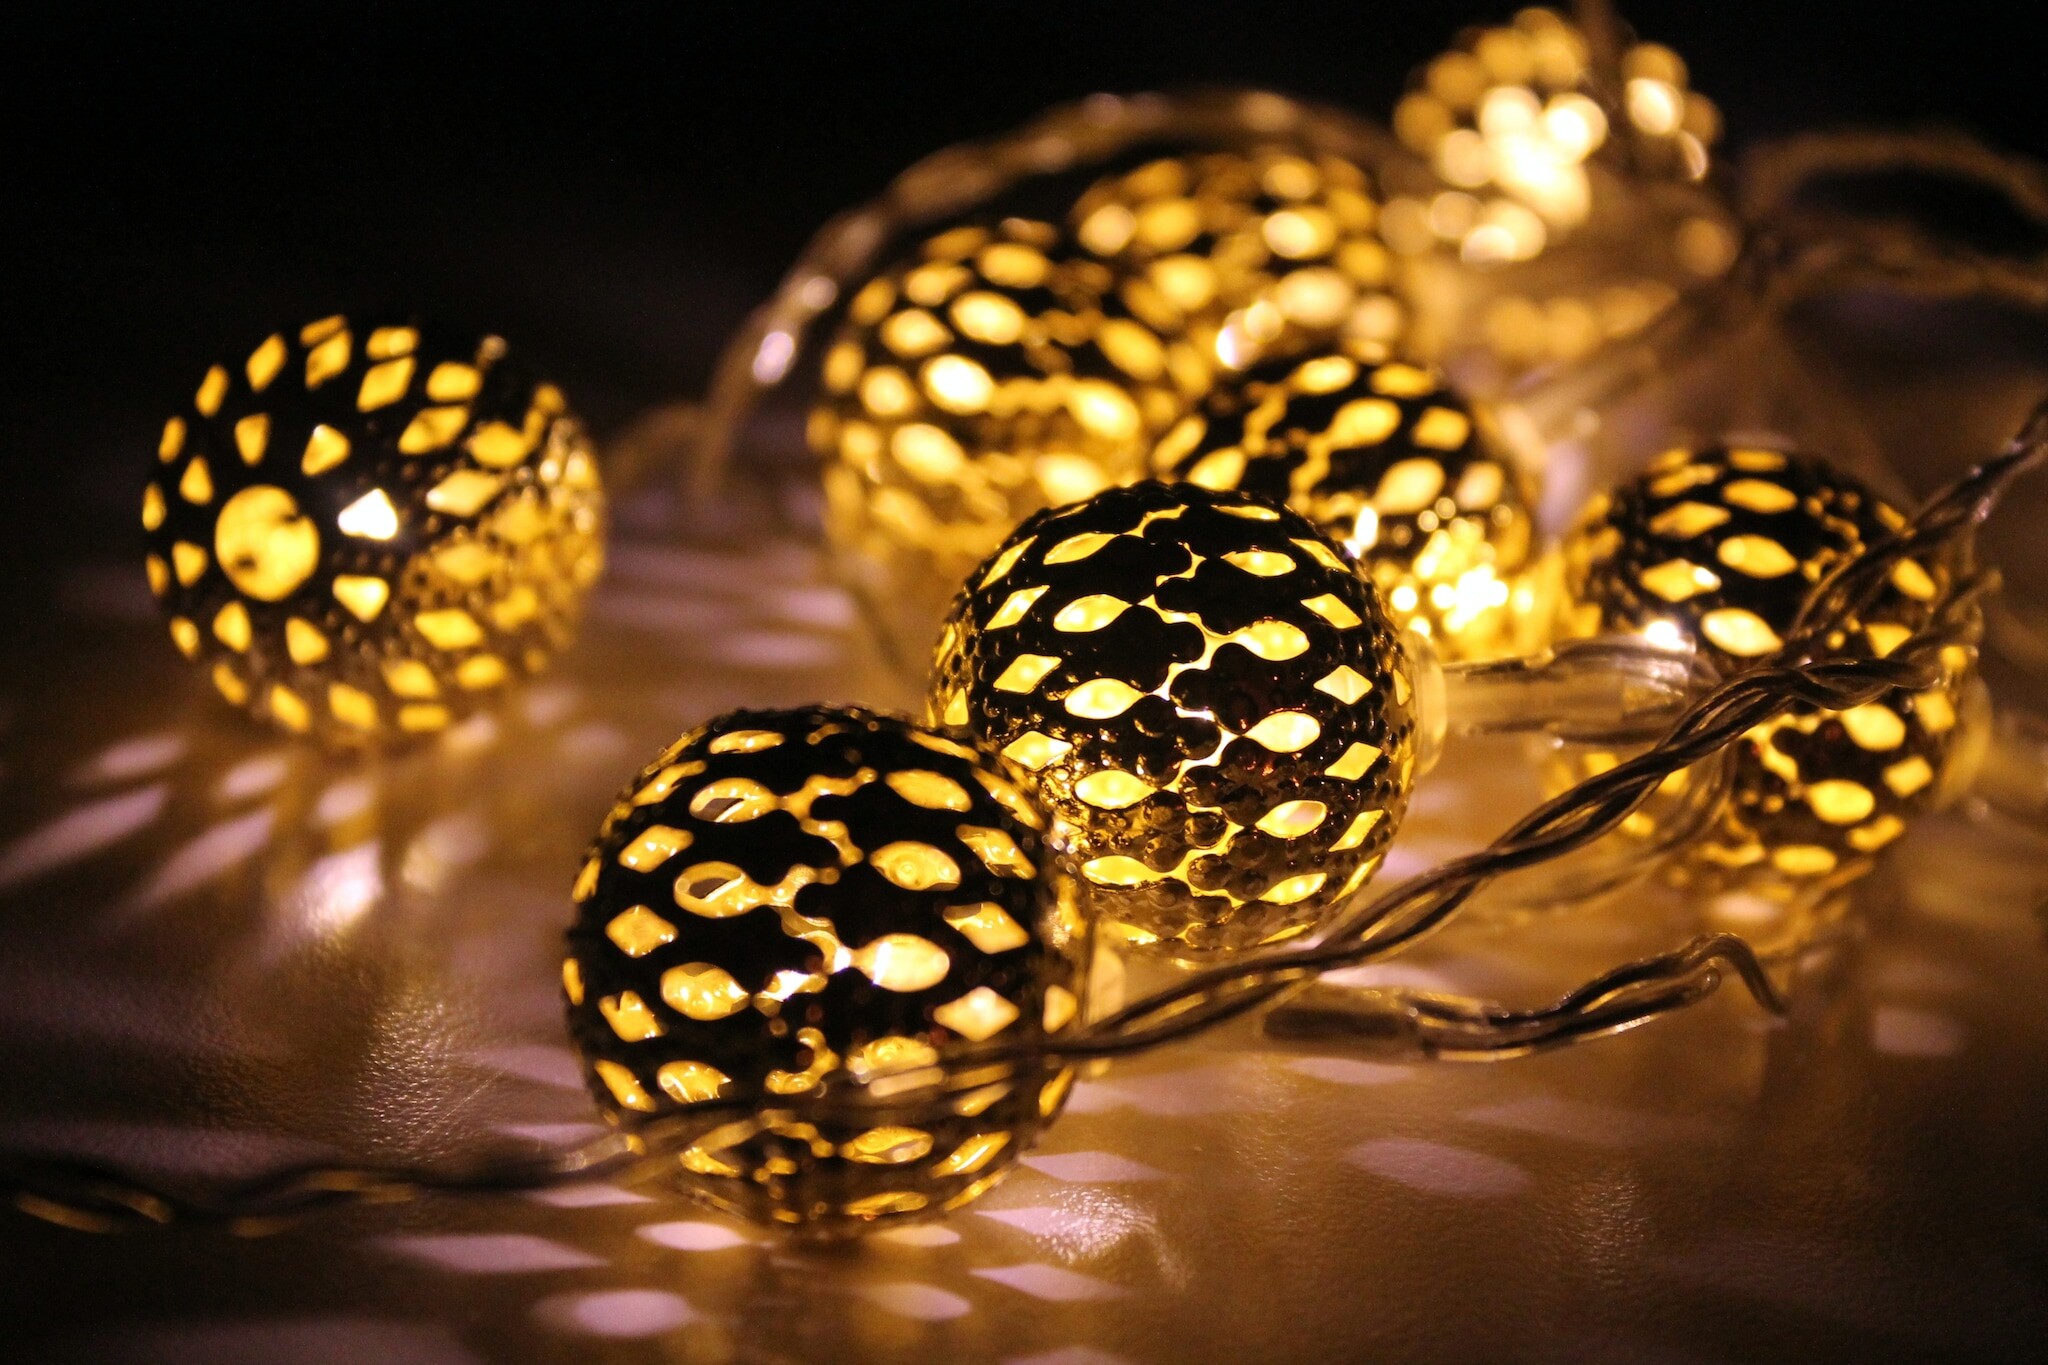 Gold Lights: Ornamented ball Xmas lights, Christmas decoration, Out-of-focus blurred lights. 2050x1370 HD Wallpaper.